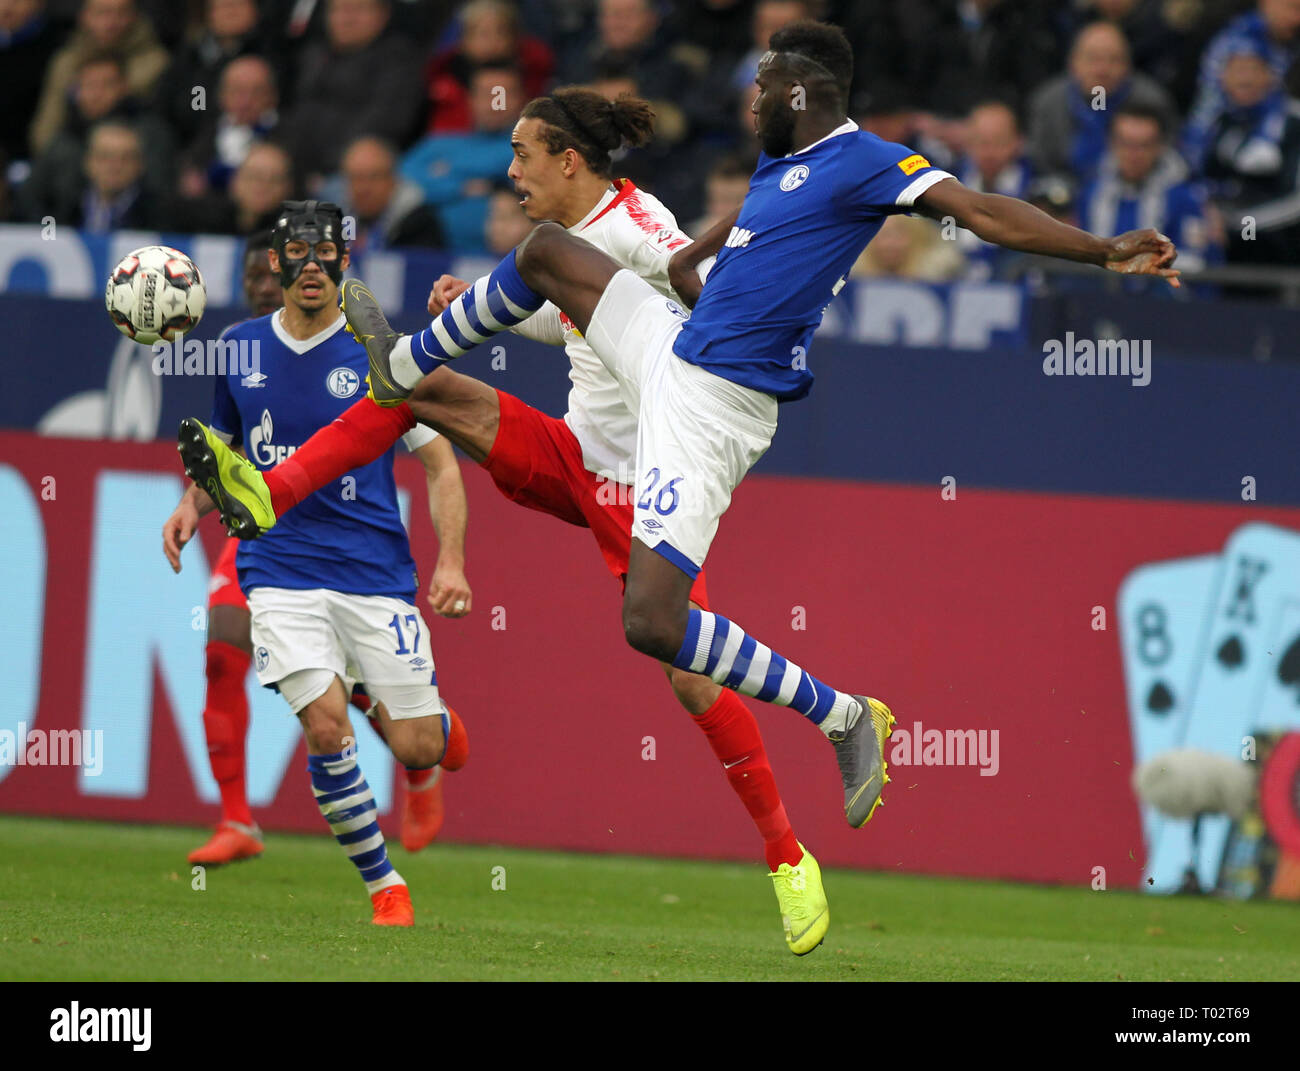 Gelsenkirchen, Germany. 16th March 2019. Salif Sane of Schalke 04, right, and Yussuf Poulsen of RB Leipzig are seen in action during the German Bundesliga soccer match between FC Schalke 04 and RB Leipzig in Gelsenkirchen. ( Final score; FC Schalke 0:1 RB Leipzig) Credit: SOPA Images Limited/Alamy Live News Stock Photo